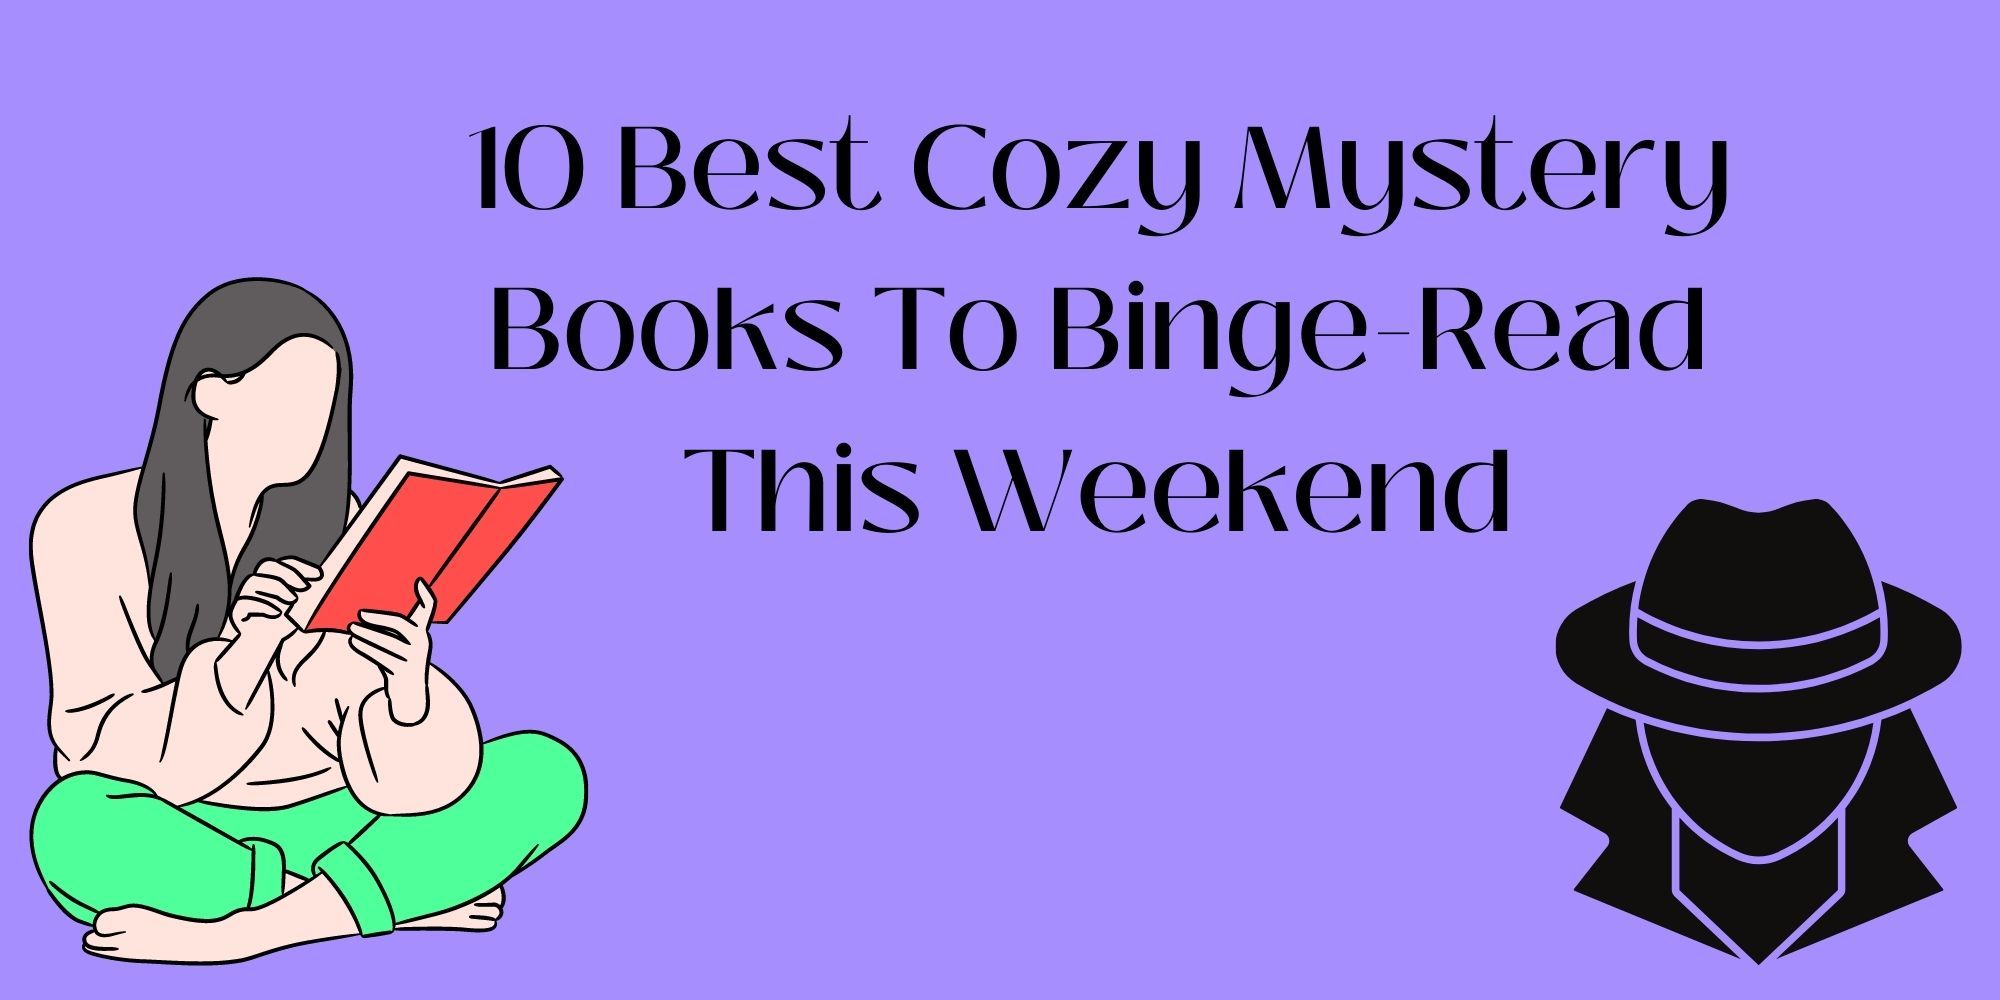 10 Best Cozy Mystery Books To Binge-Read This Weekend